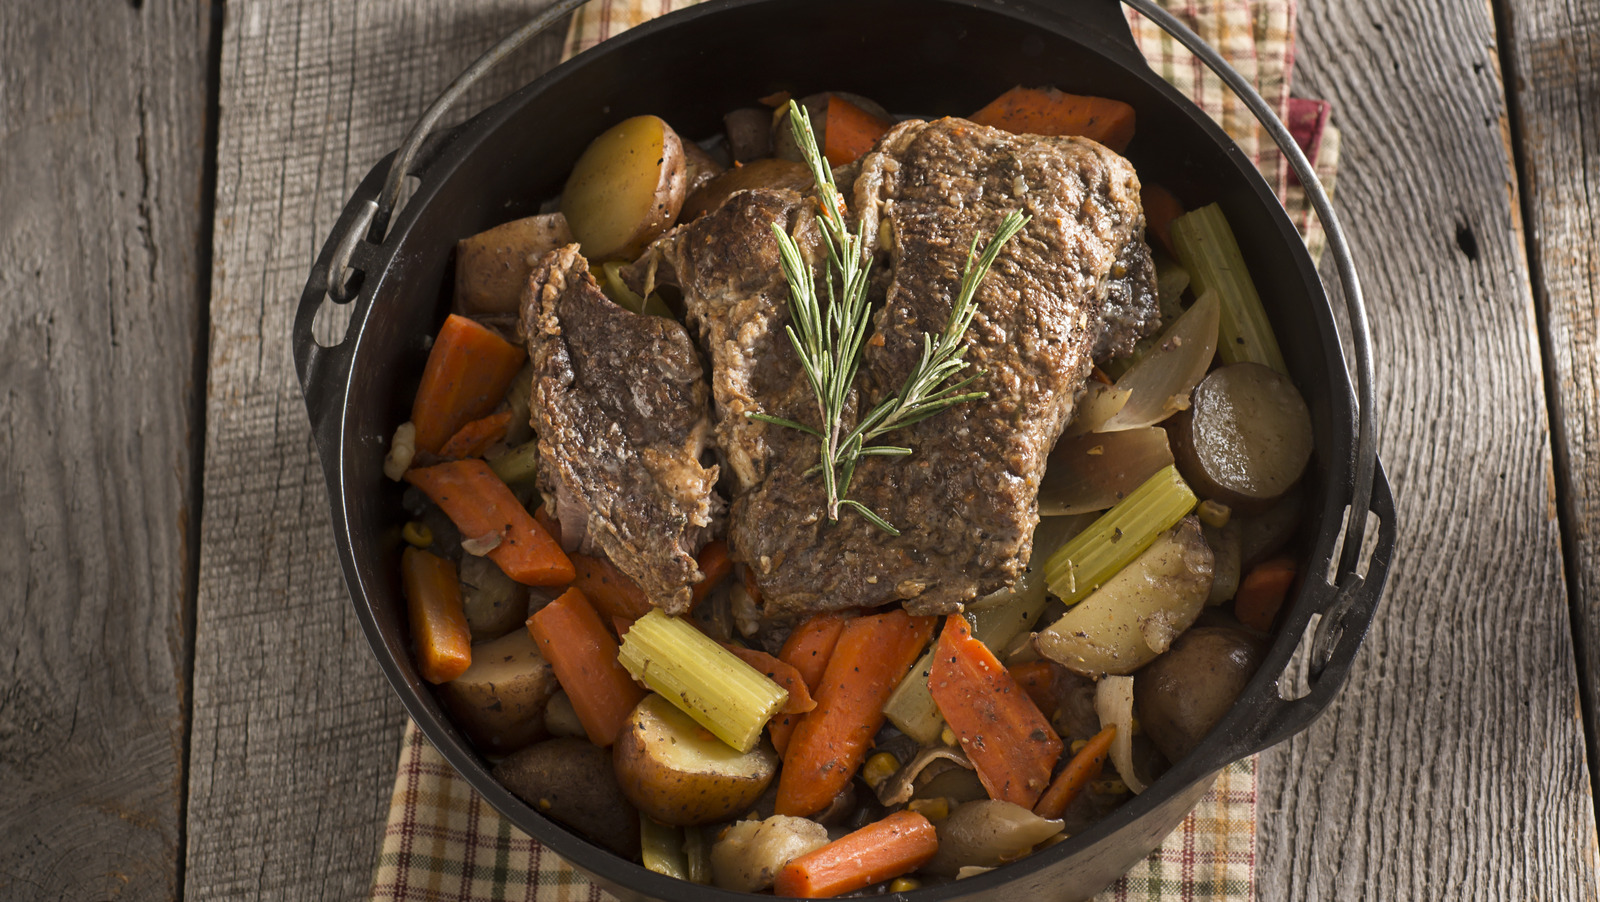 Cloves Are The Secret Ingredient For A Boldly Flavored Pot Roast